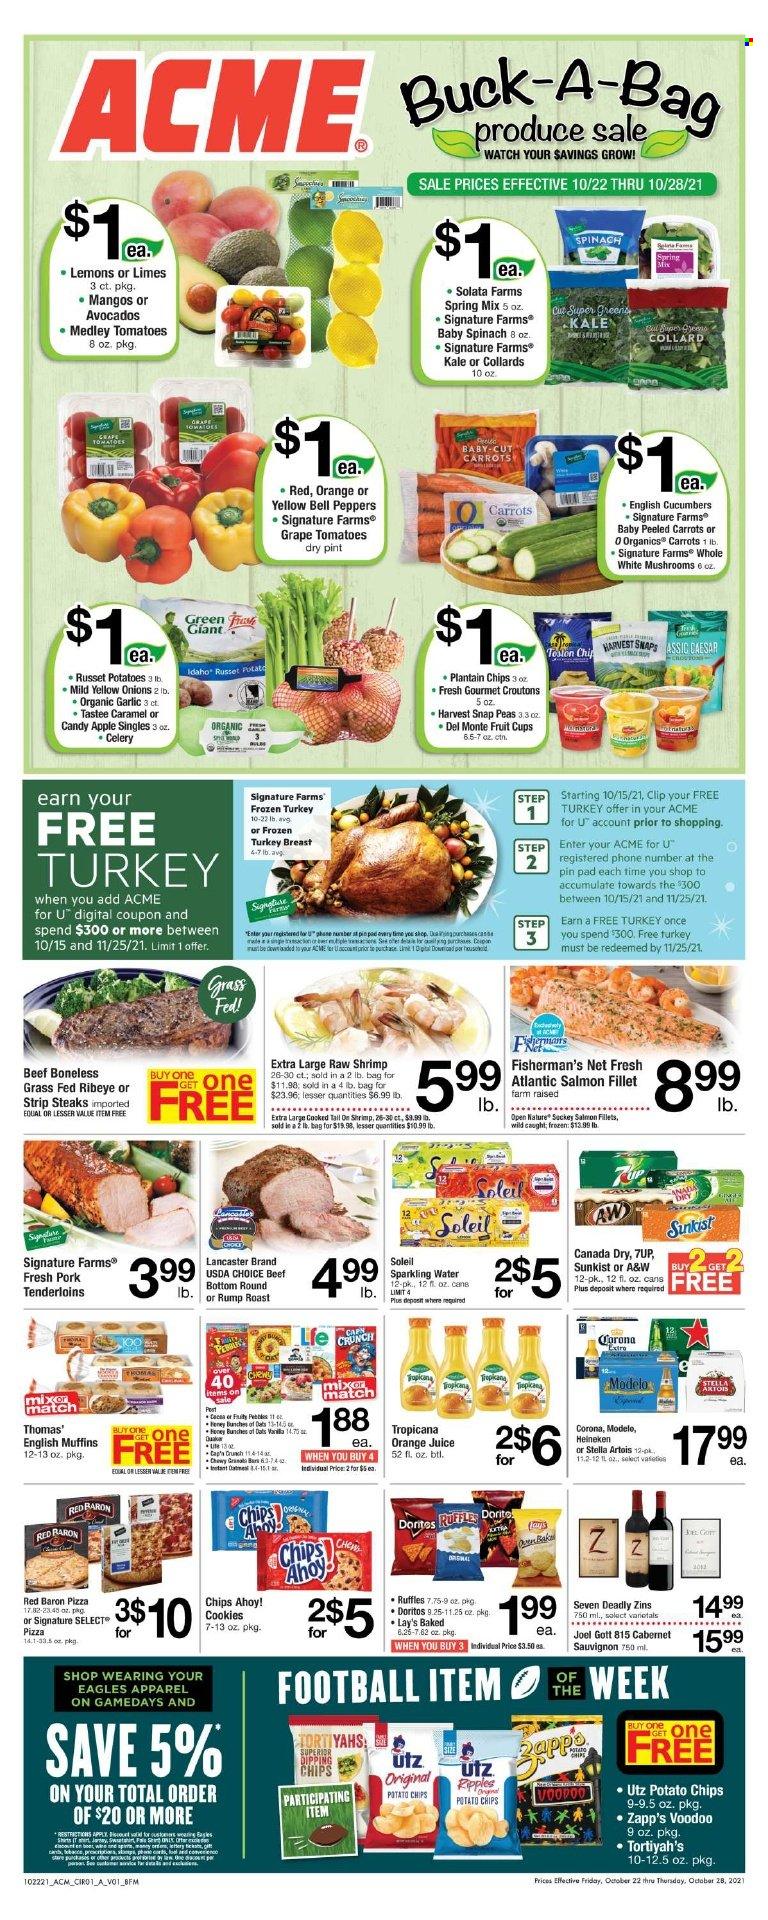 thumbnail - ACME Flyer - 10/22/2021 - 10/28/2021 - Sales products - fruit cup, english muffins, bell peppers, carrots, celery, cucumber, garlic, russet potatoes, kale, peas, onion, peppers, avocado, limes, salmon, salmon fillet, shrimps, pizza, snap peas, Red Baron, cookies, Chips Ahoy!, Doritos, potato chips, Lay’s, Ruffles, croutons, Canada Dry, orange juice, juice, 7UP, A&W, sparkling water, Cabernet Sauvignon, beer, Corona Extra, Modelo, turkey breast, whole turkey, beef meat, steak, striploin steak, pork tenderloin, watch, Stella Artois, lemons. Page 1.